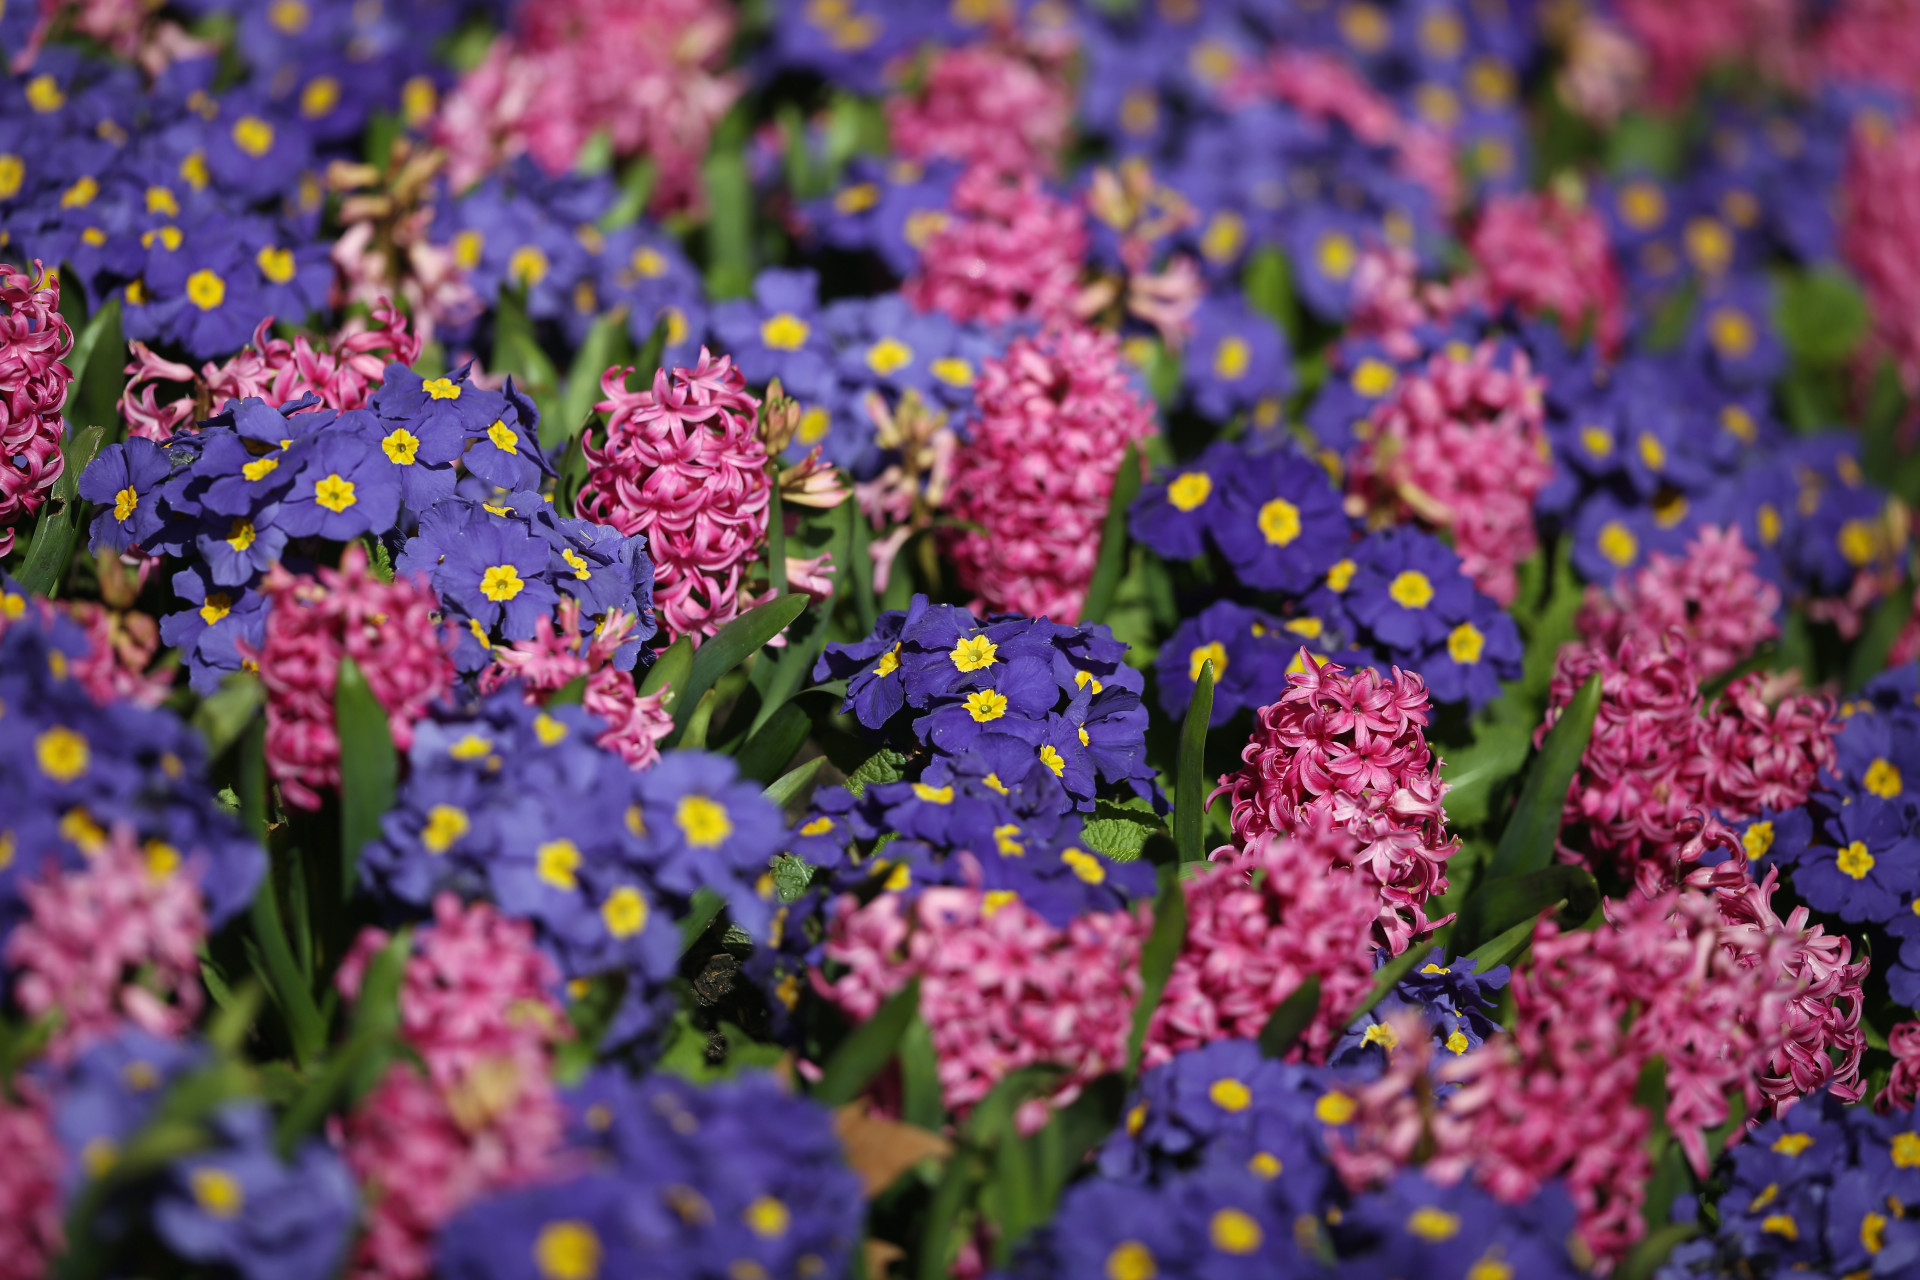 A variety of colourful flowers can be seen blooming at St James' Park in London.